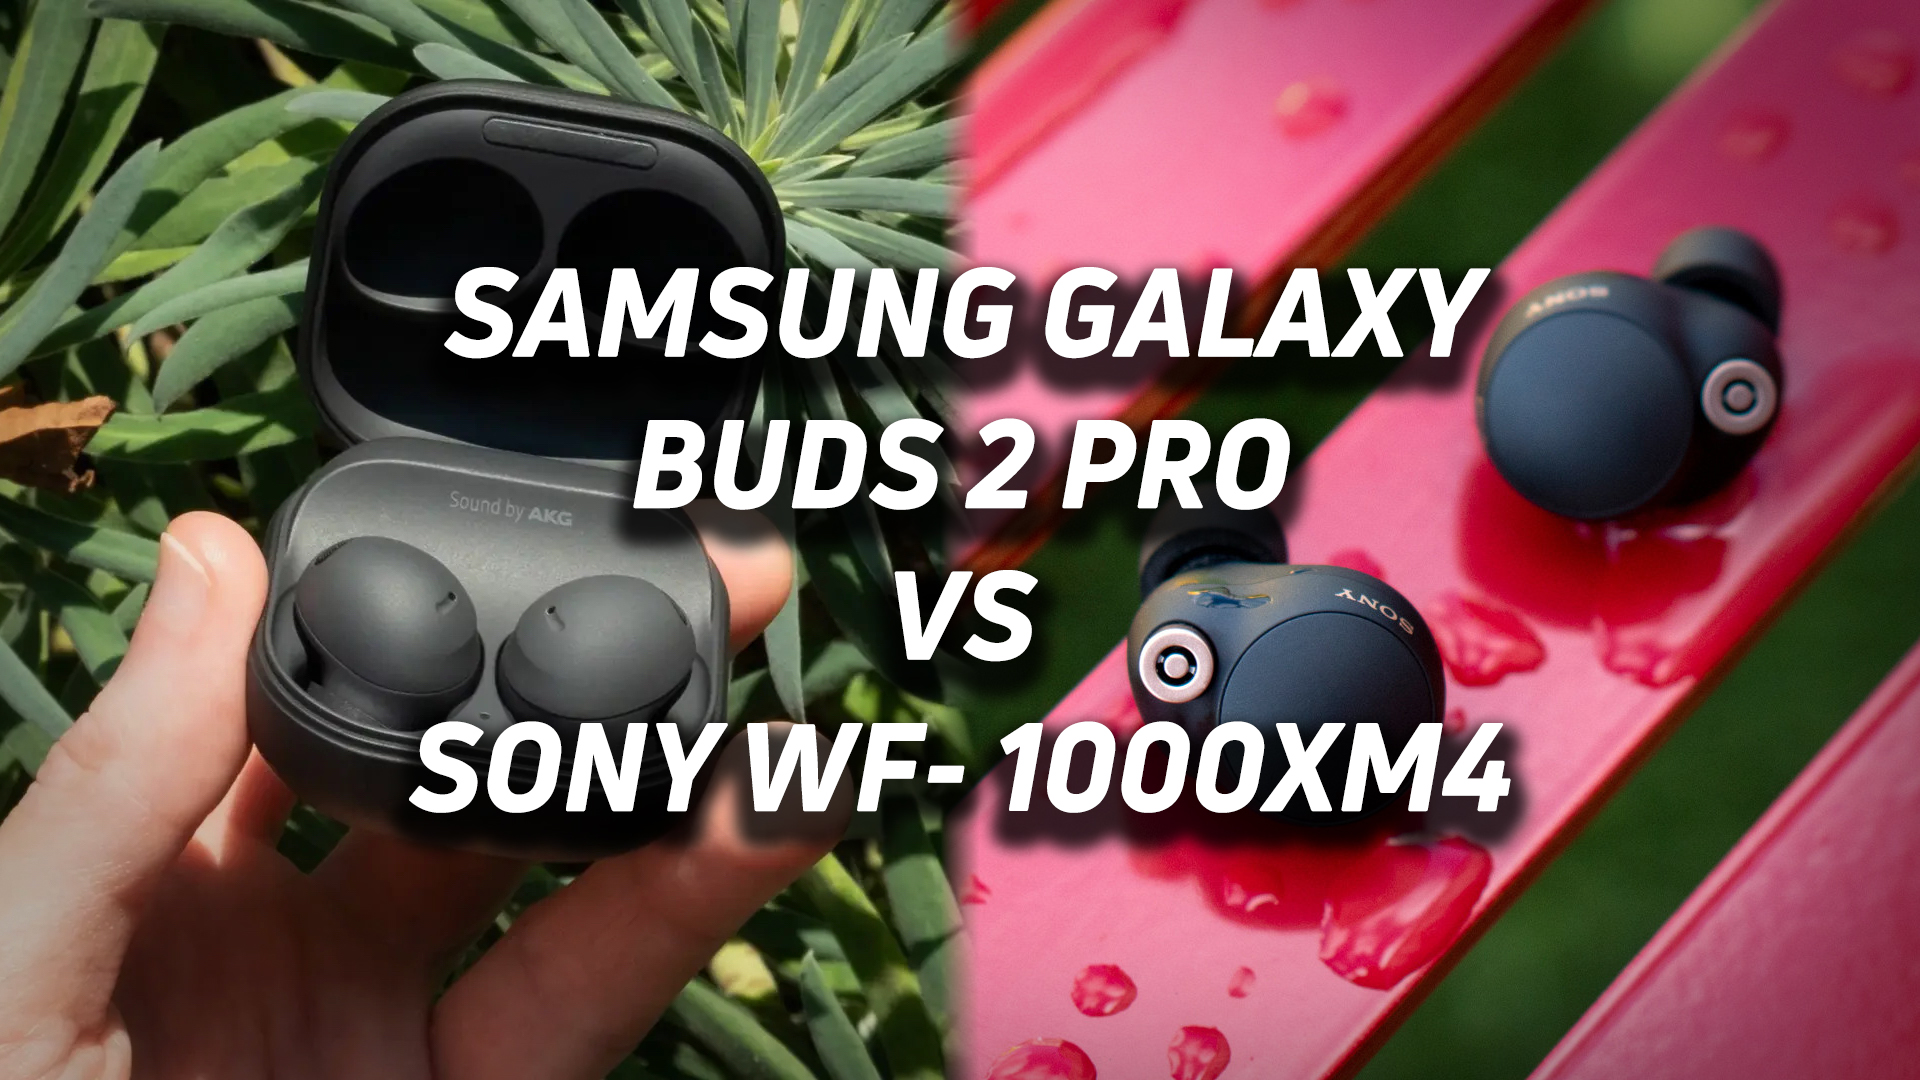 The hero image for the Samsung Galaxy Buds 2 Pro vs Son WF-1000XM4.